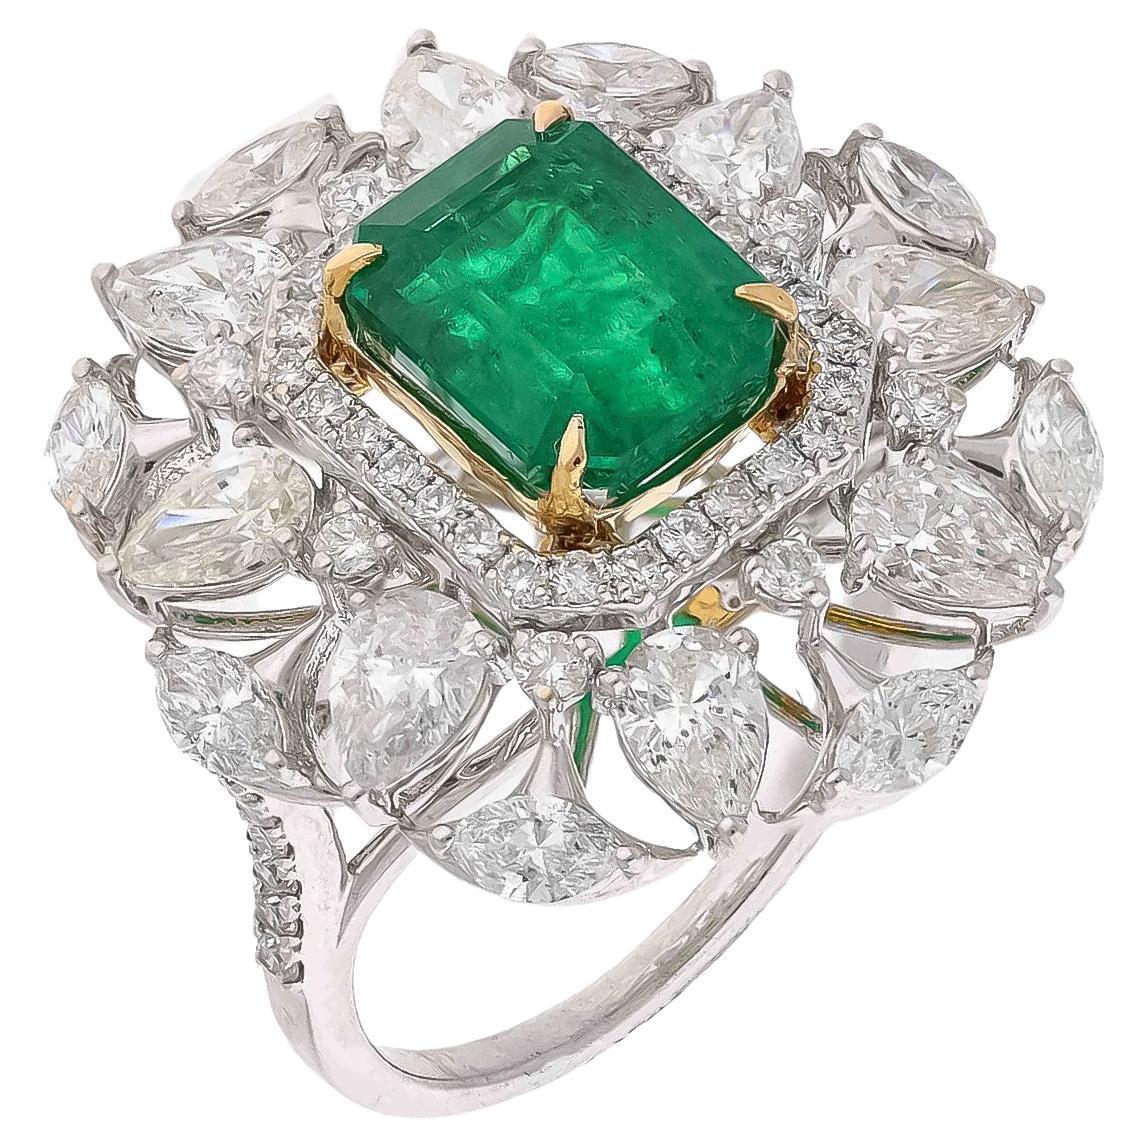 Natural Zambian Emerald Ring with Diamond and 18k Gold